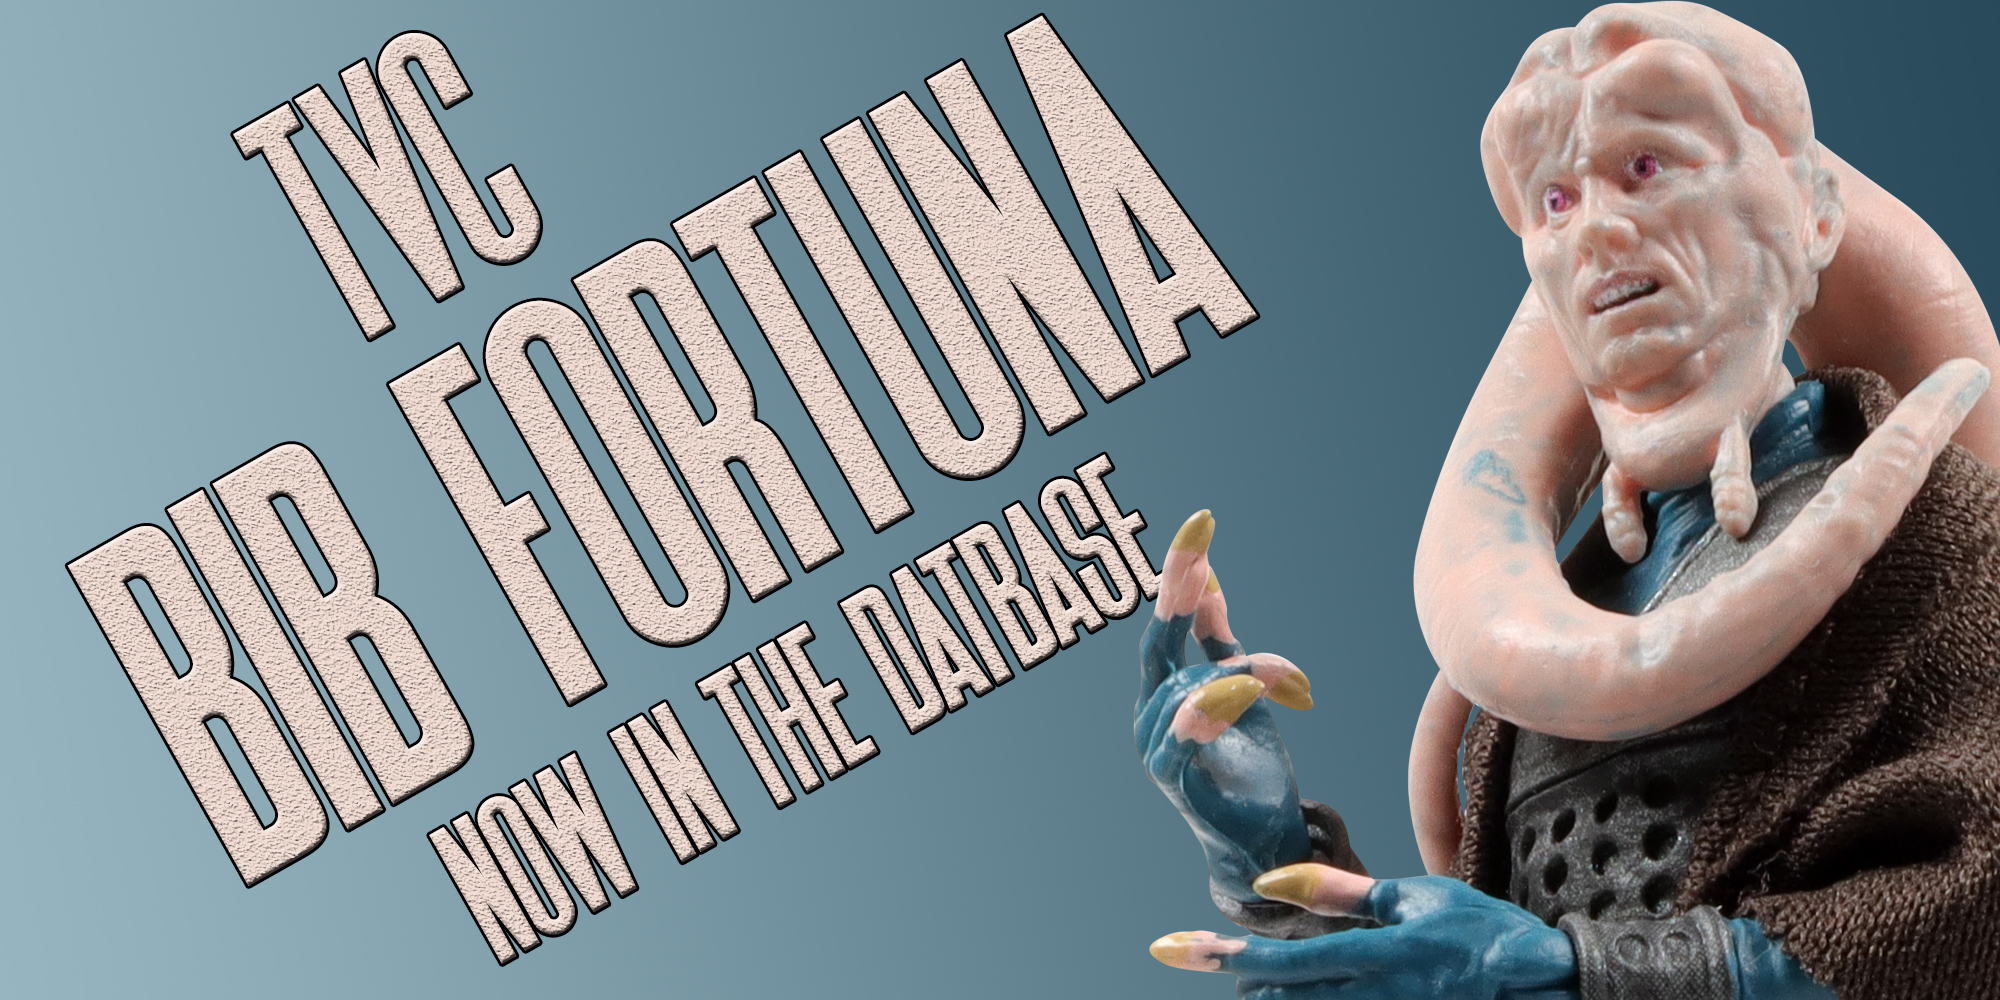 TVC Bib Fortuna - Now In The Database - Check It Out!